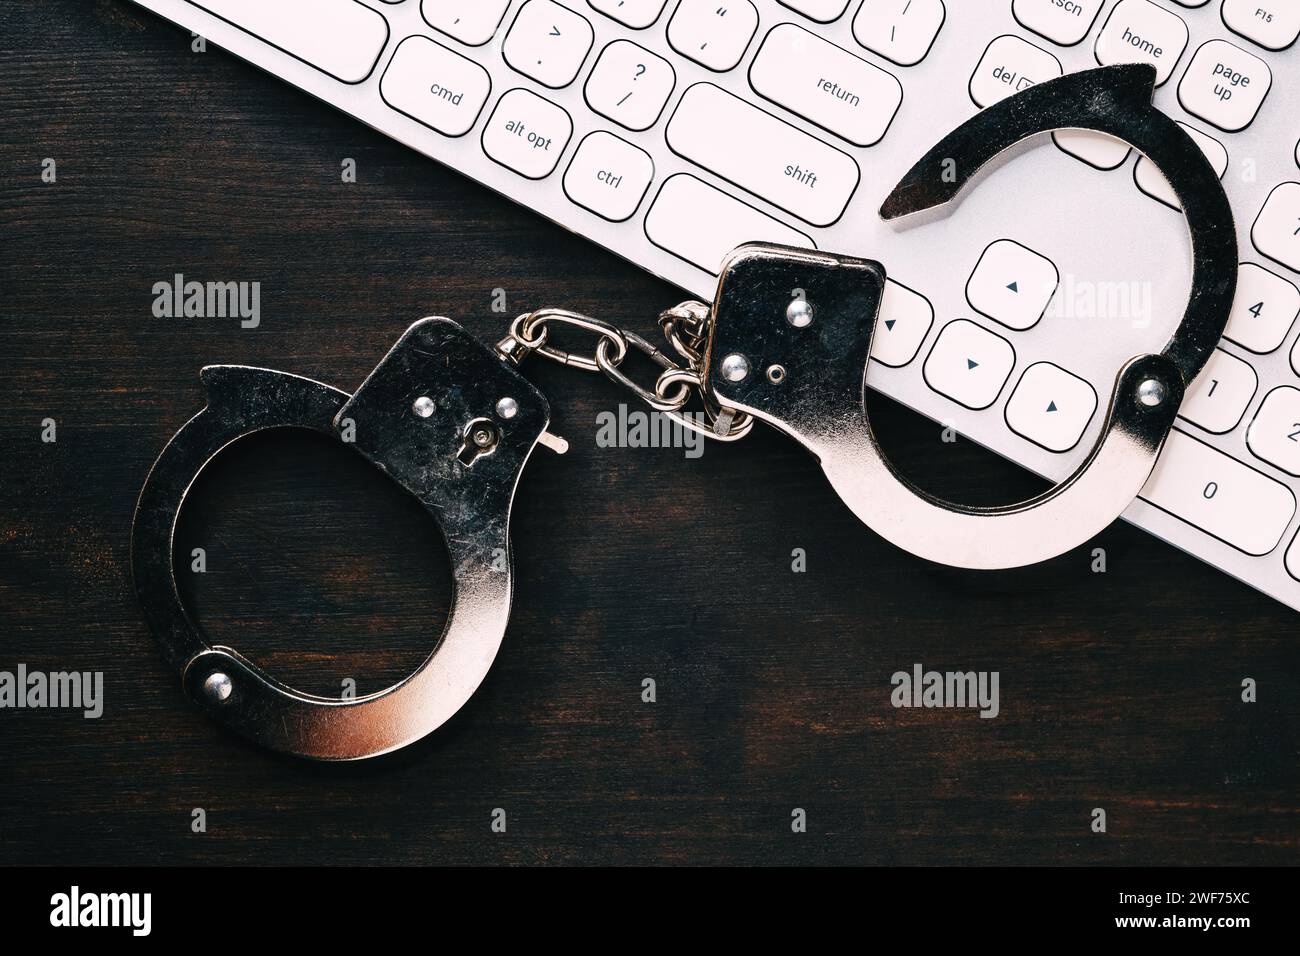 High tech IT cyber crime arrest concept, image of police handcuffs over computer keyboard, selective focus Stock Photo